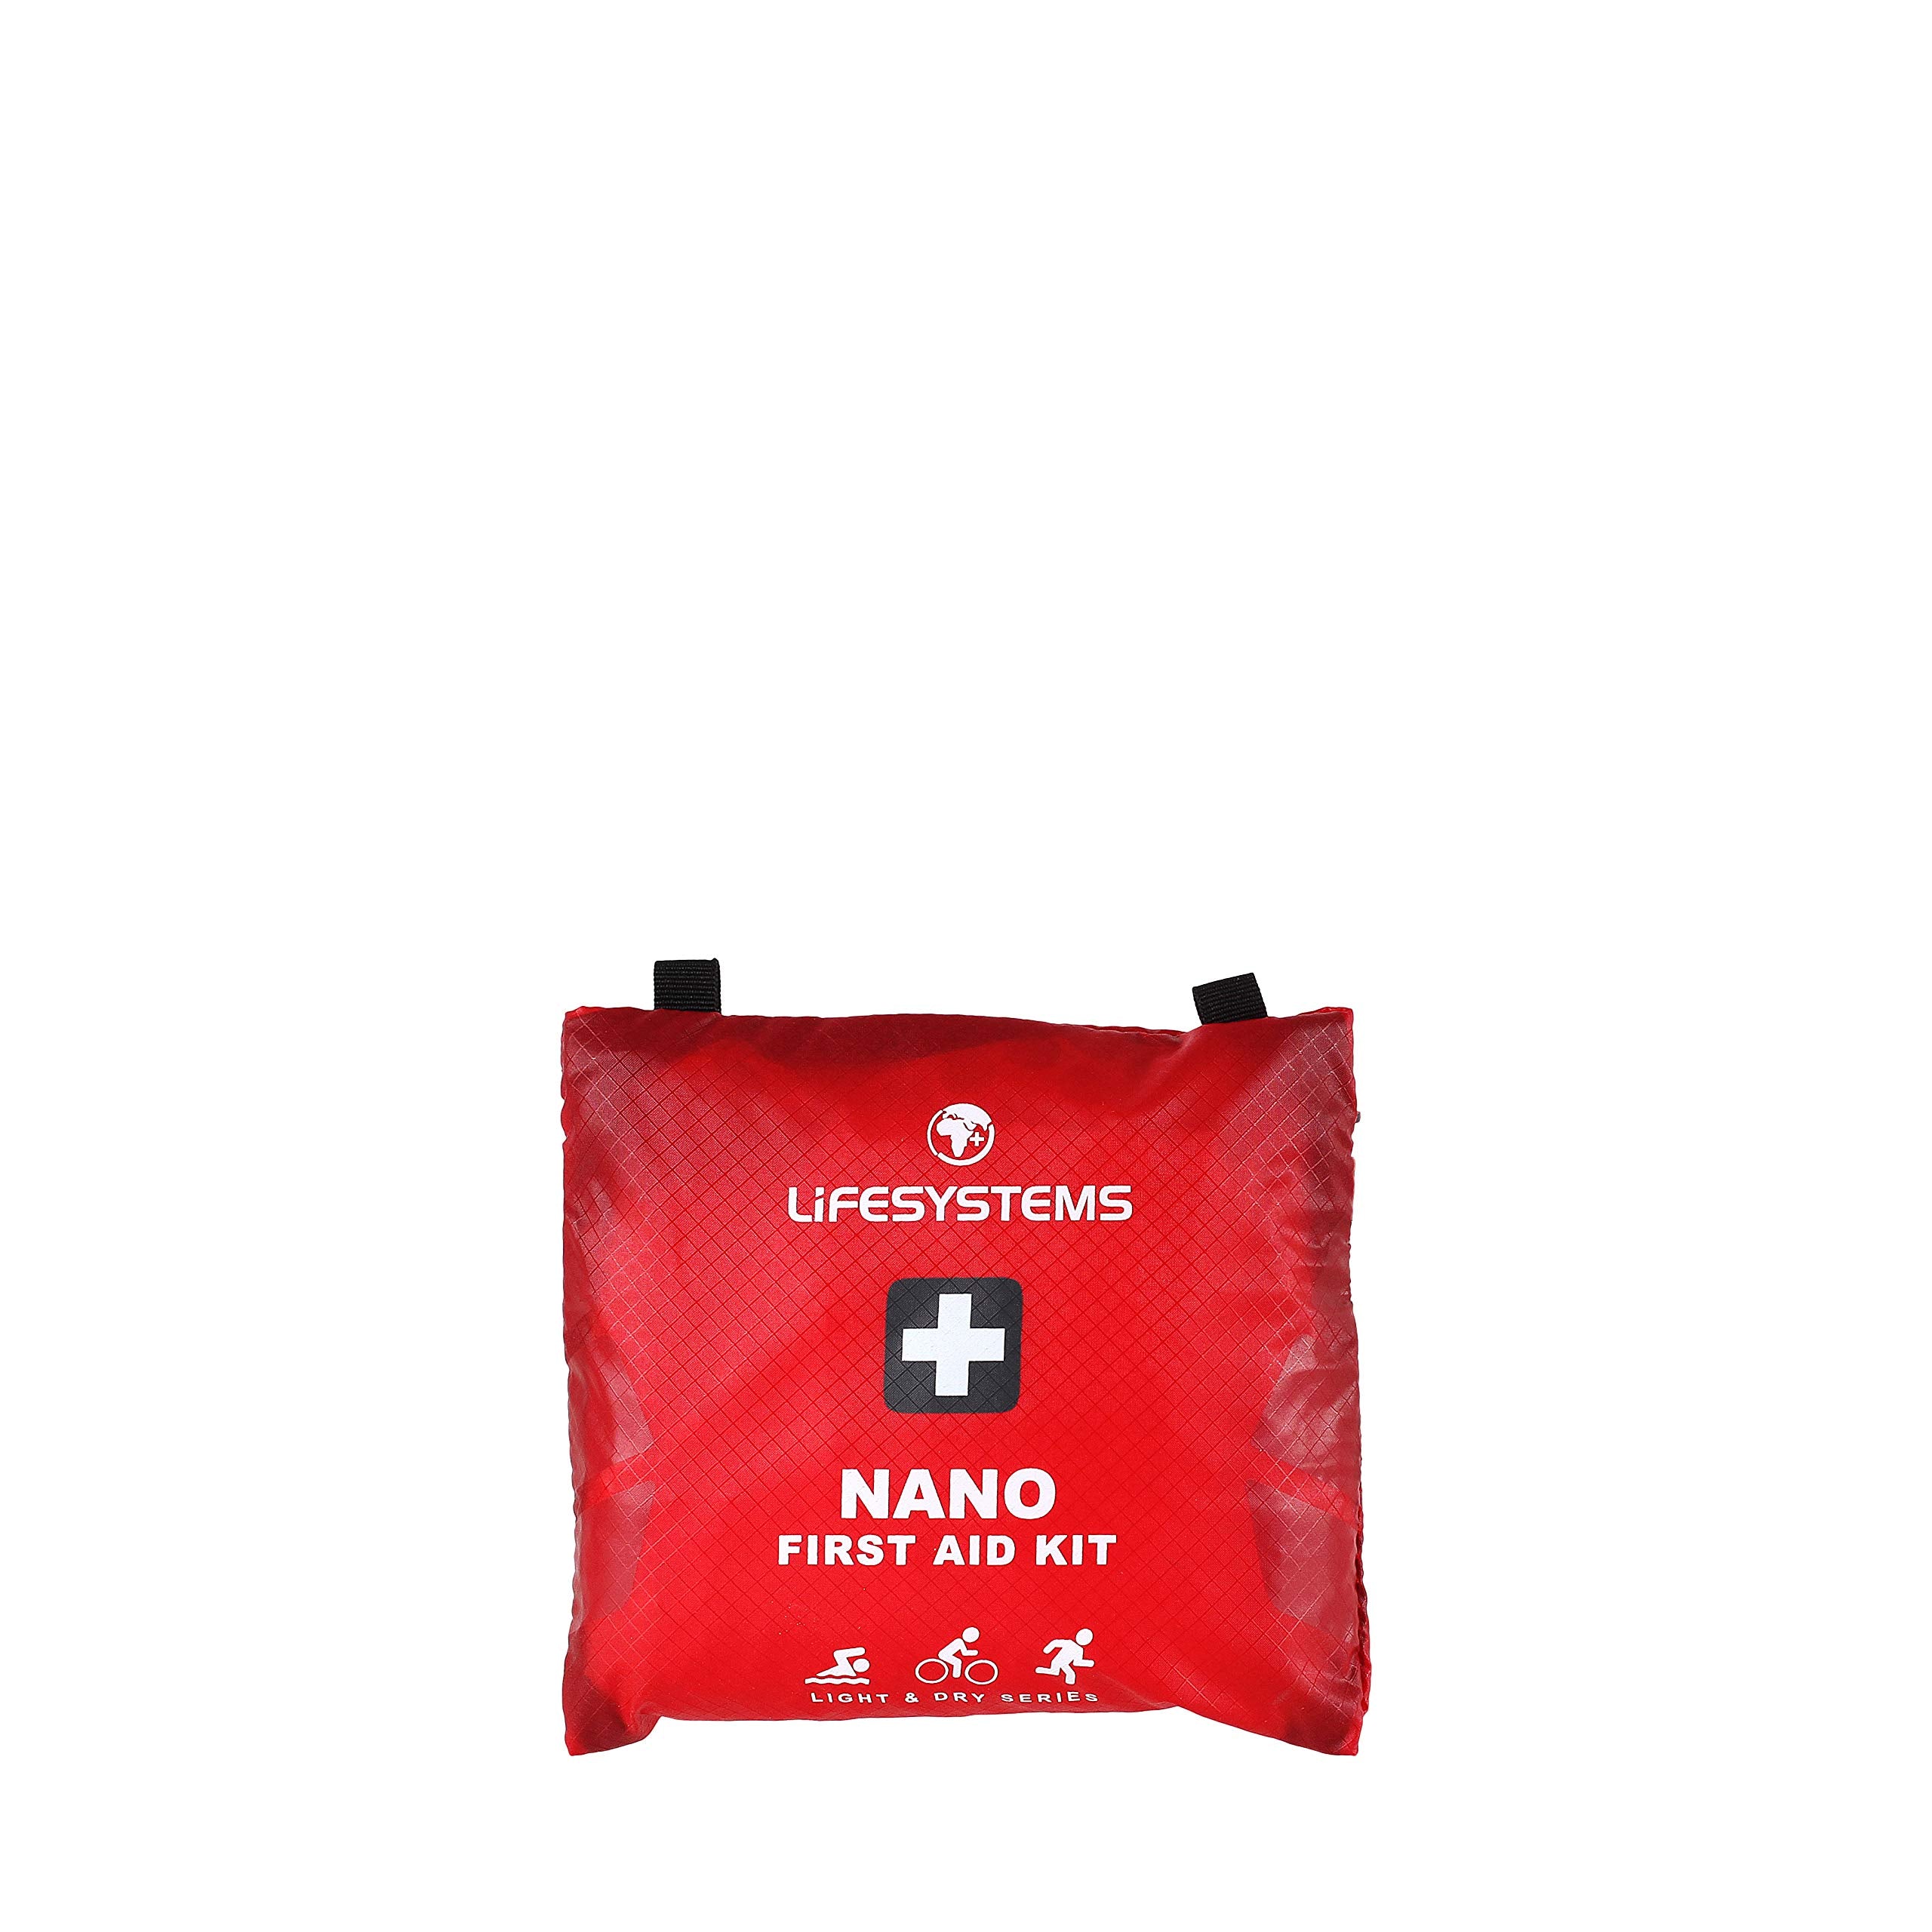 Lifesystems Light And Dry Nano First Aid Kit, CE Certified Contents, Specifically Designed for Adventure, Triathlon, Sports